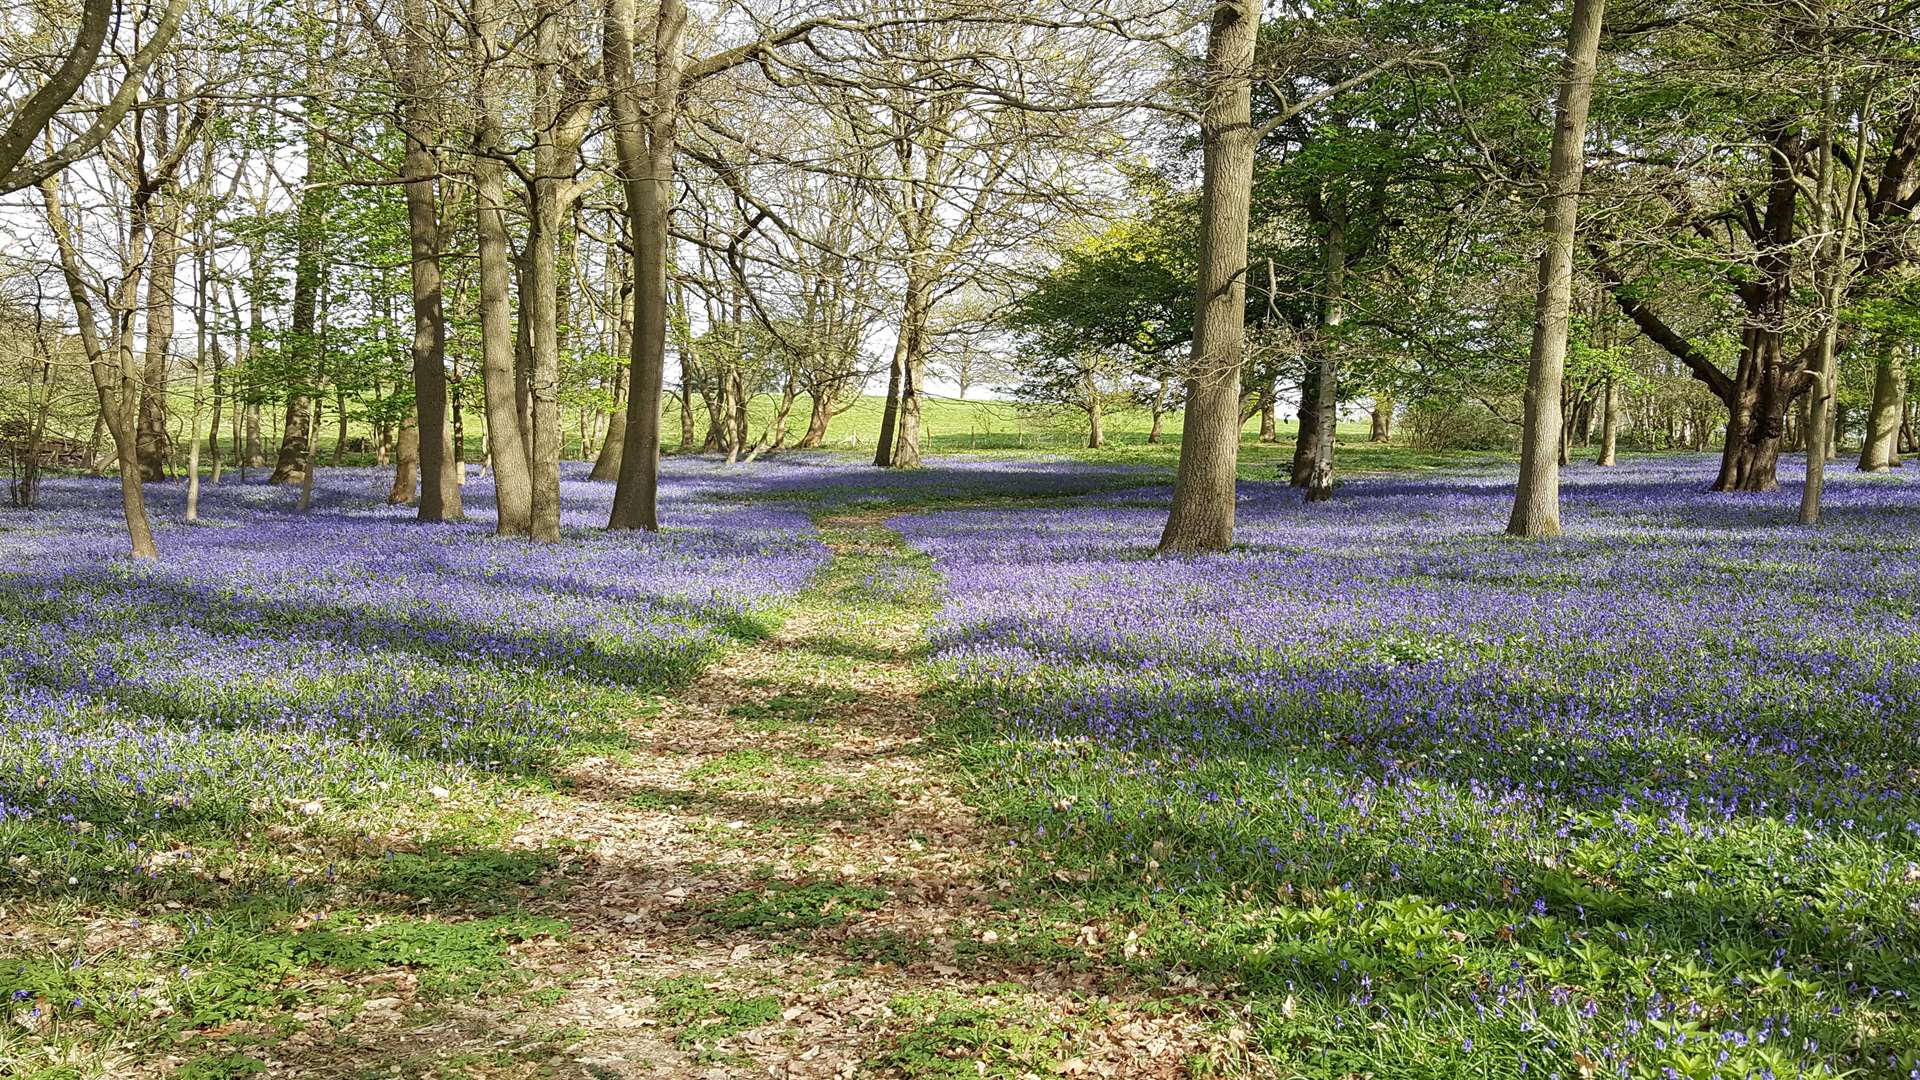 The bluebells at Great Maytham Hall